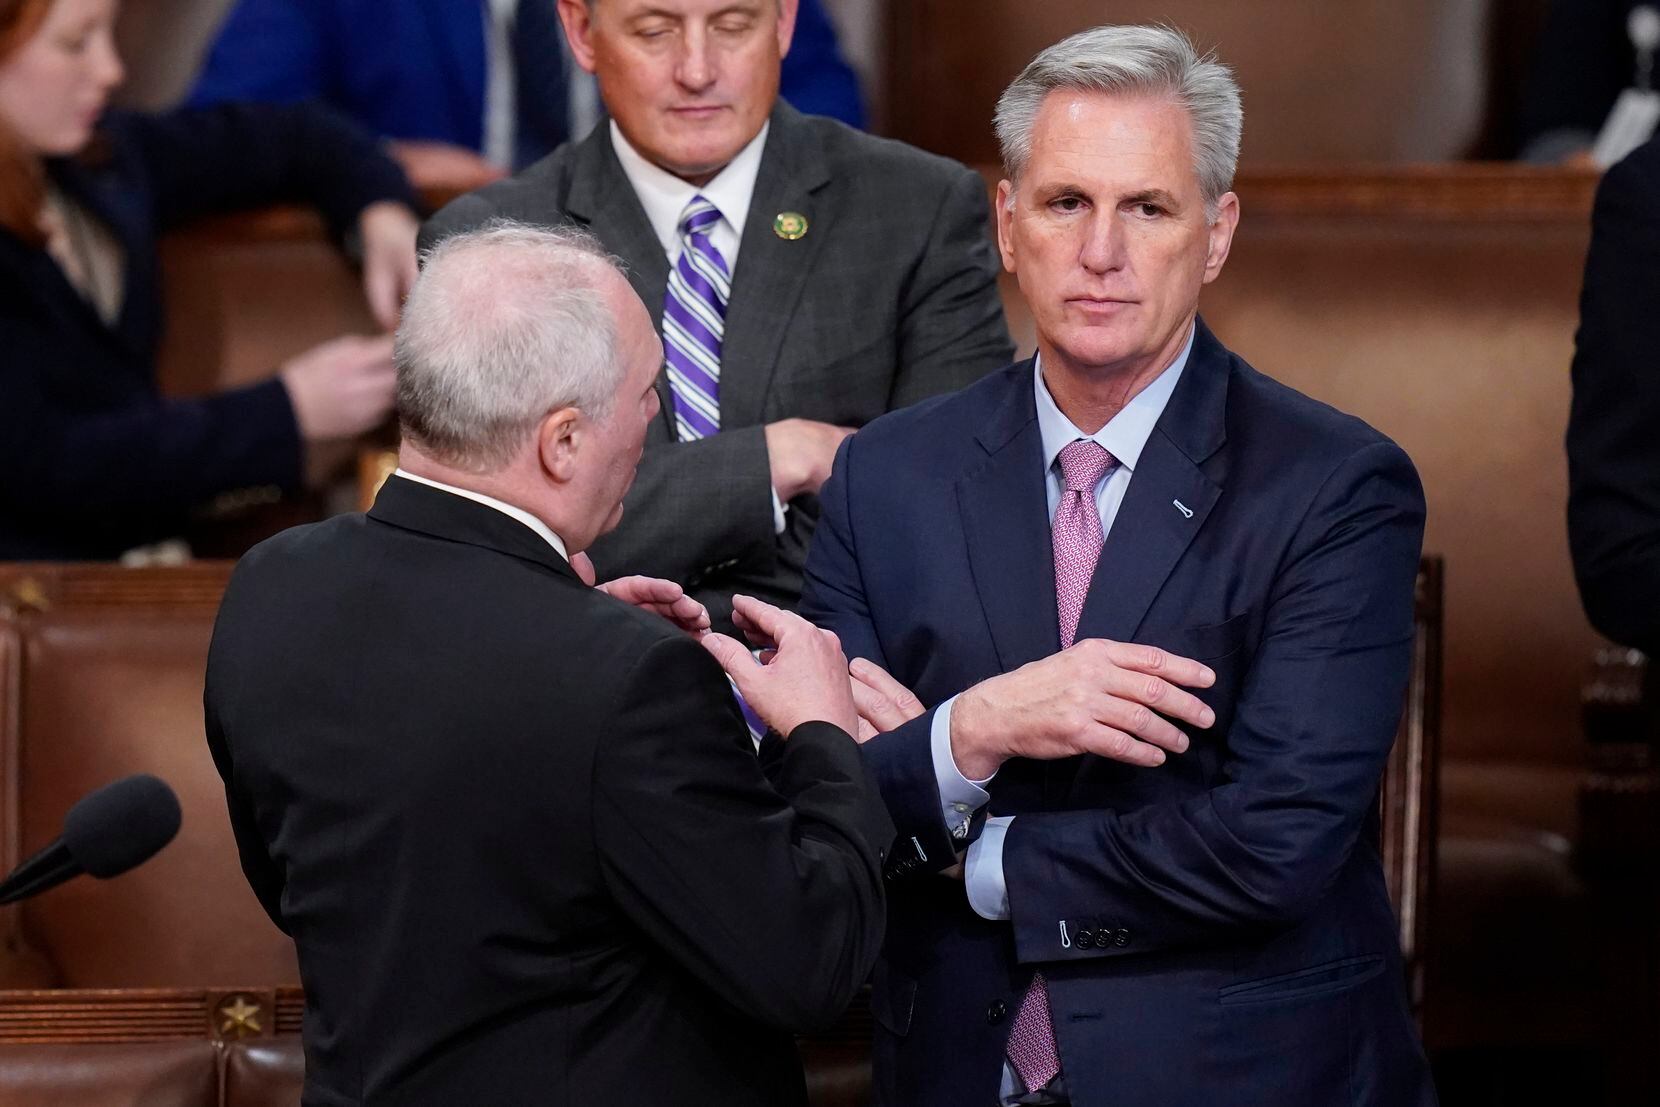 Rep. Kevin McCarthy, R-Calif. (right) talked with Rep. Steve Scalise, R-La., during the 13th...